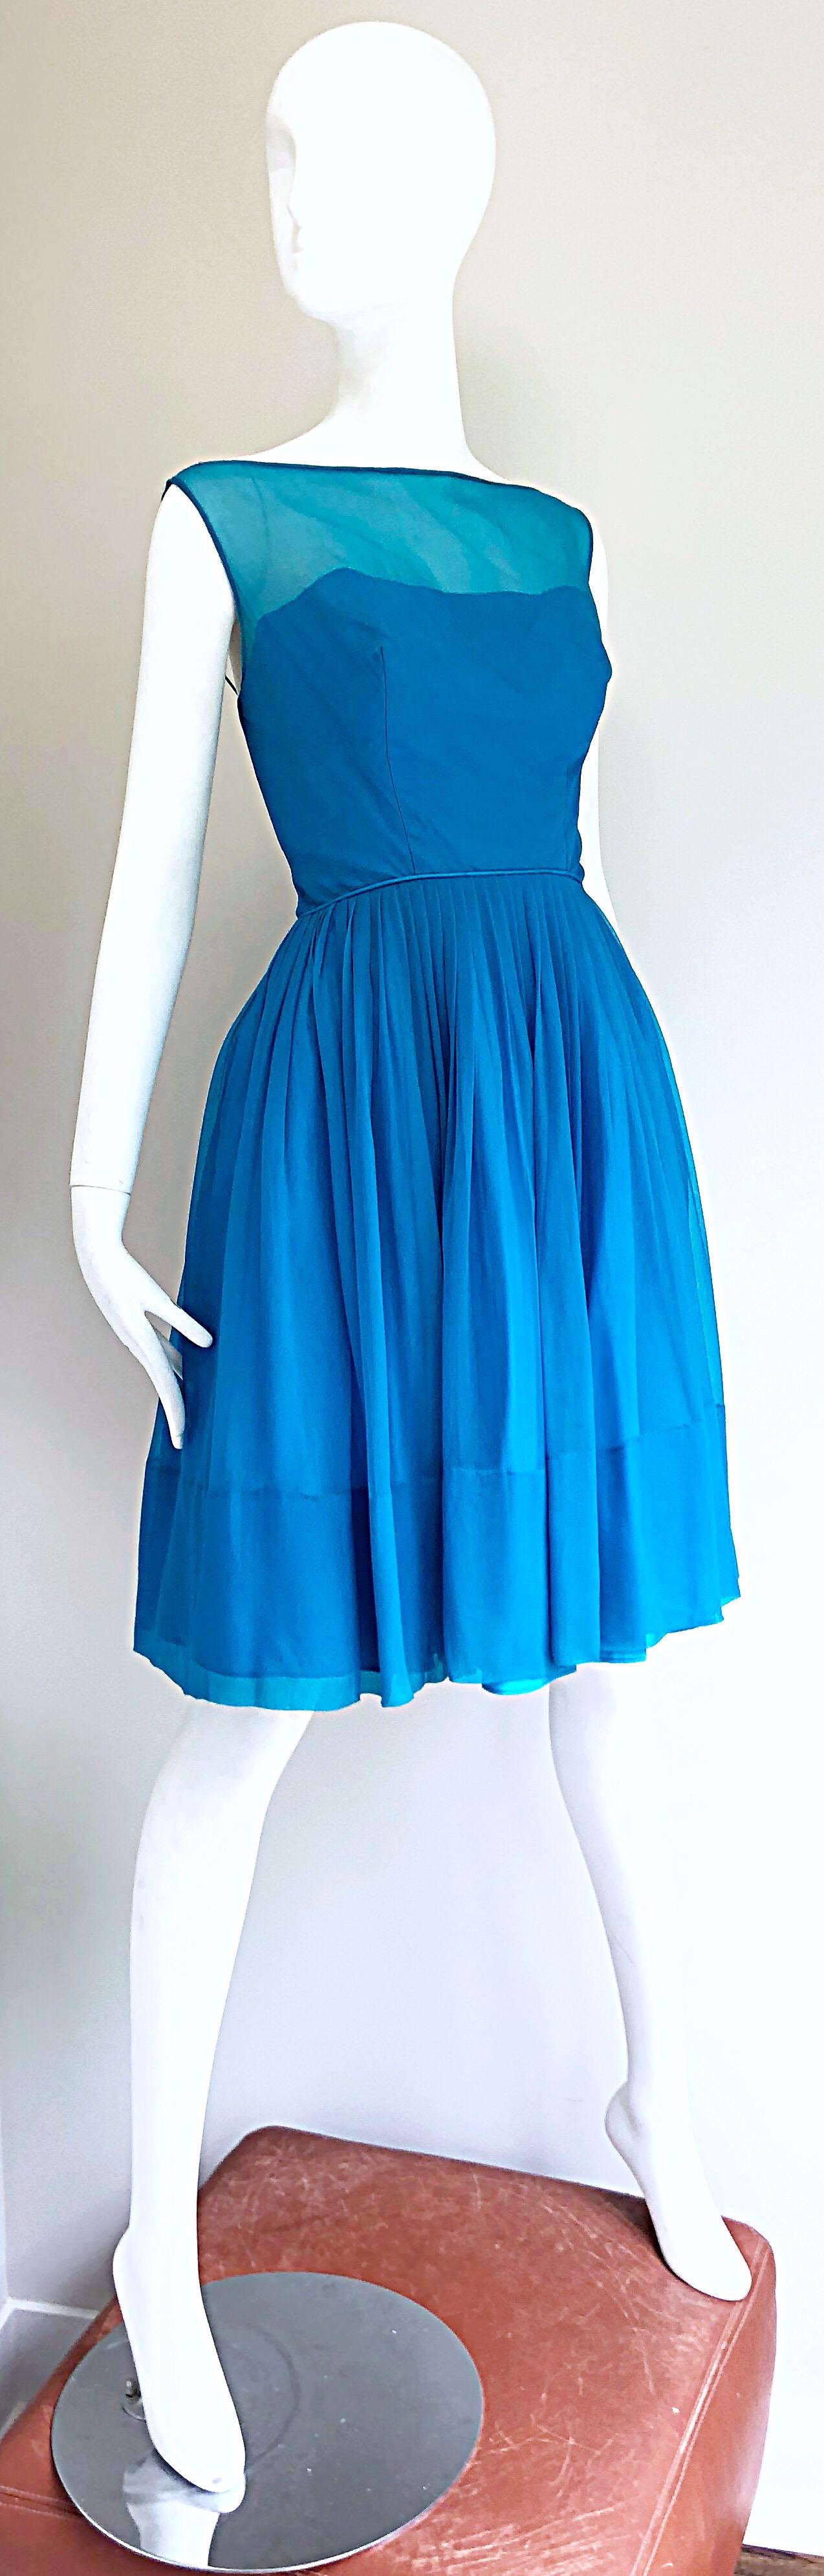 1950s Turquoise Blue Silk Chiffon Nude Illusion Fit n' Flare Vintage 50s Dress 3